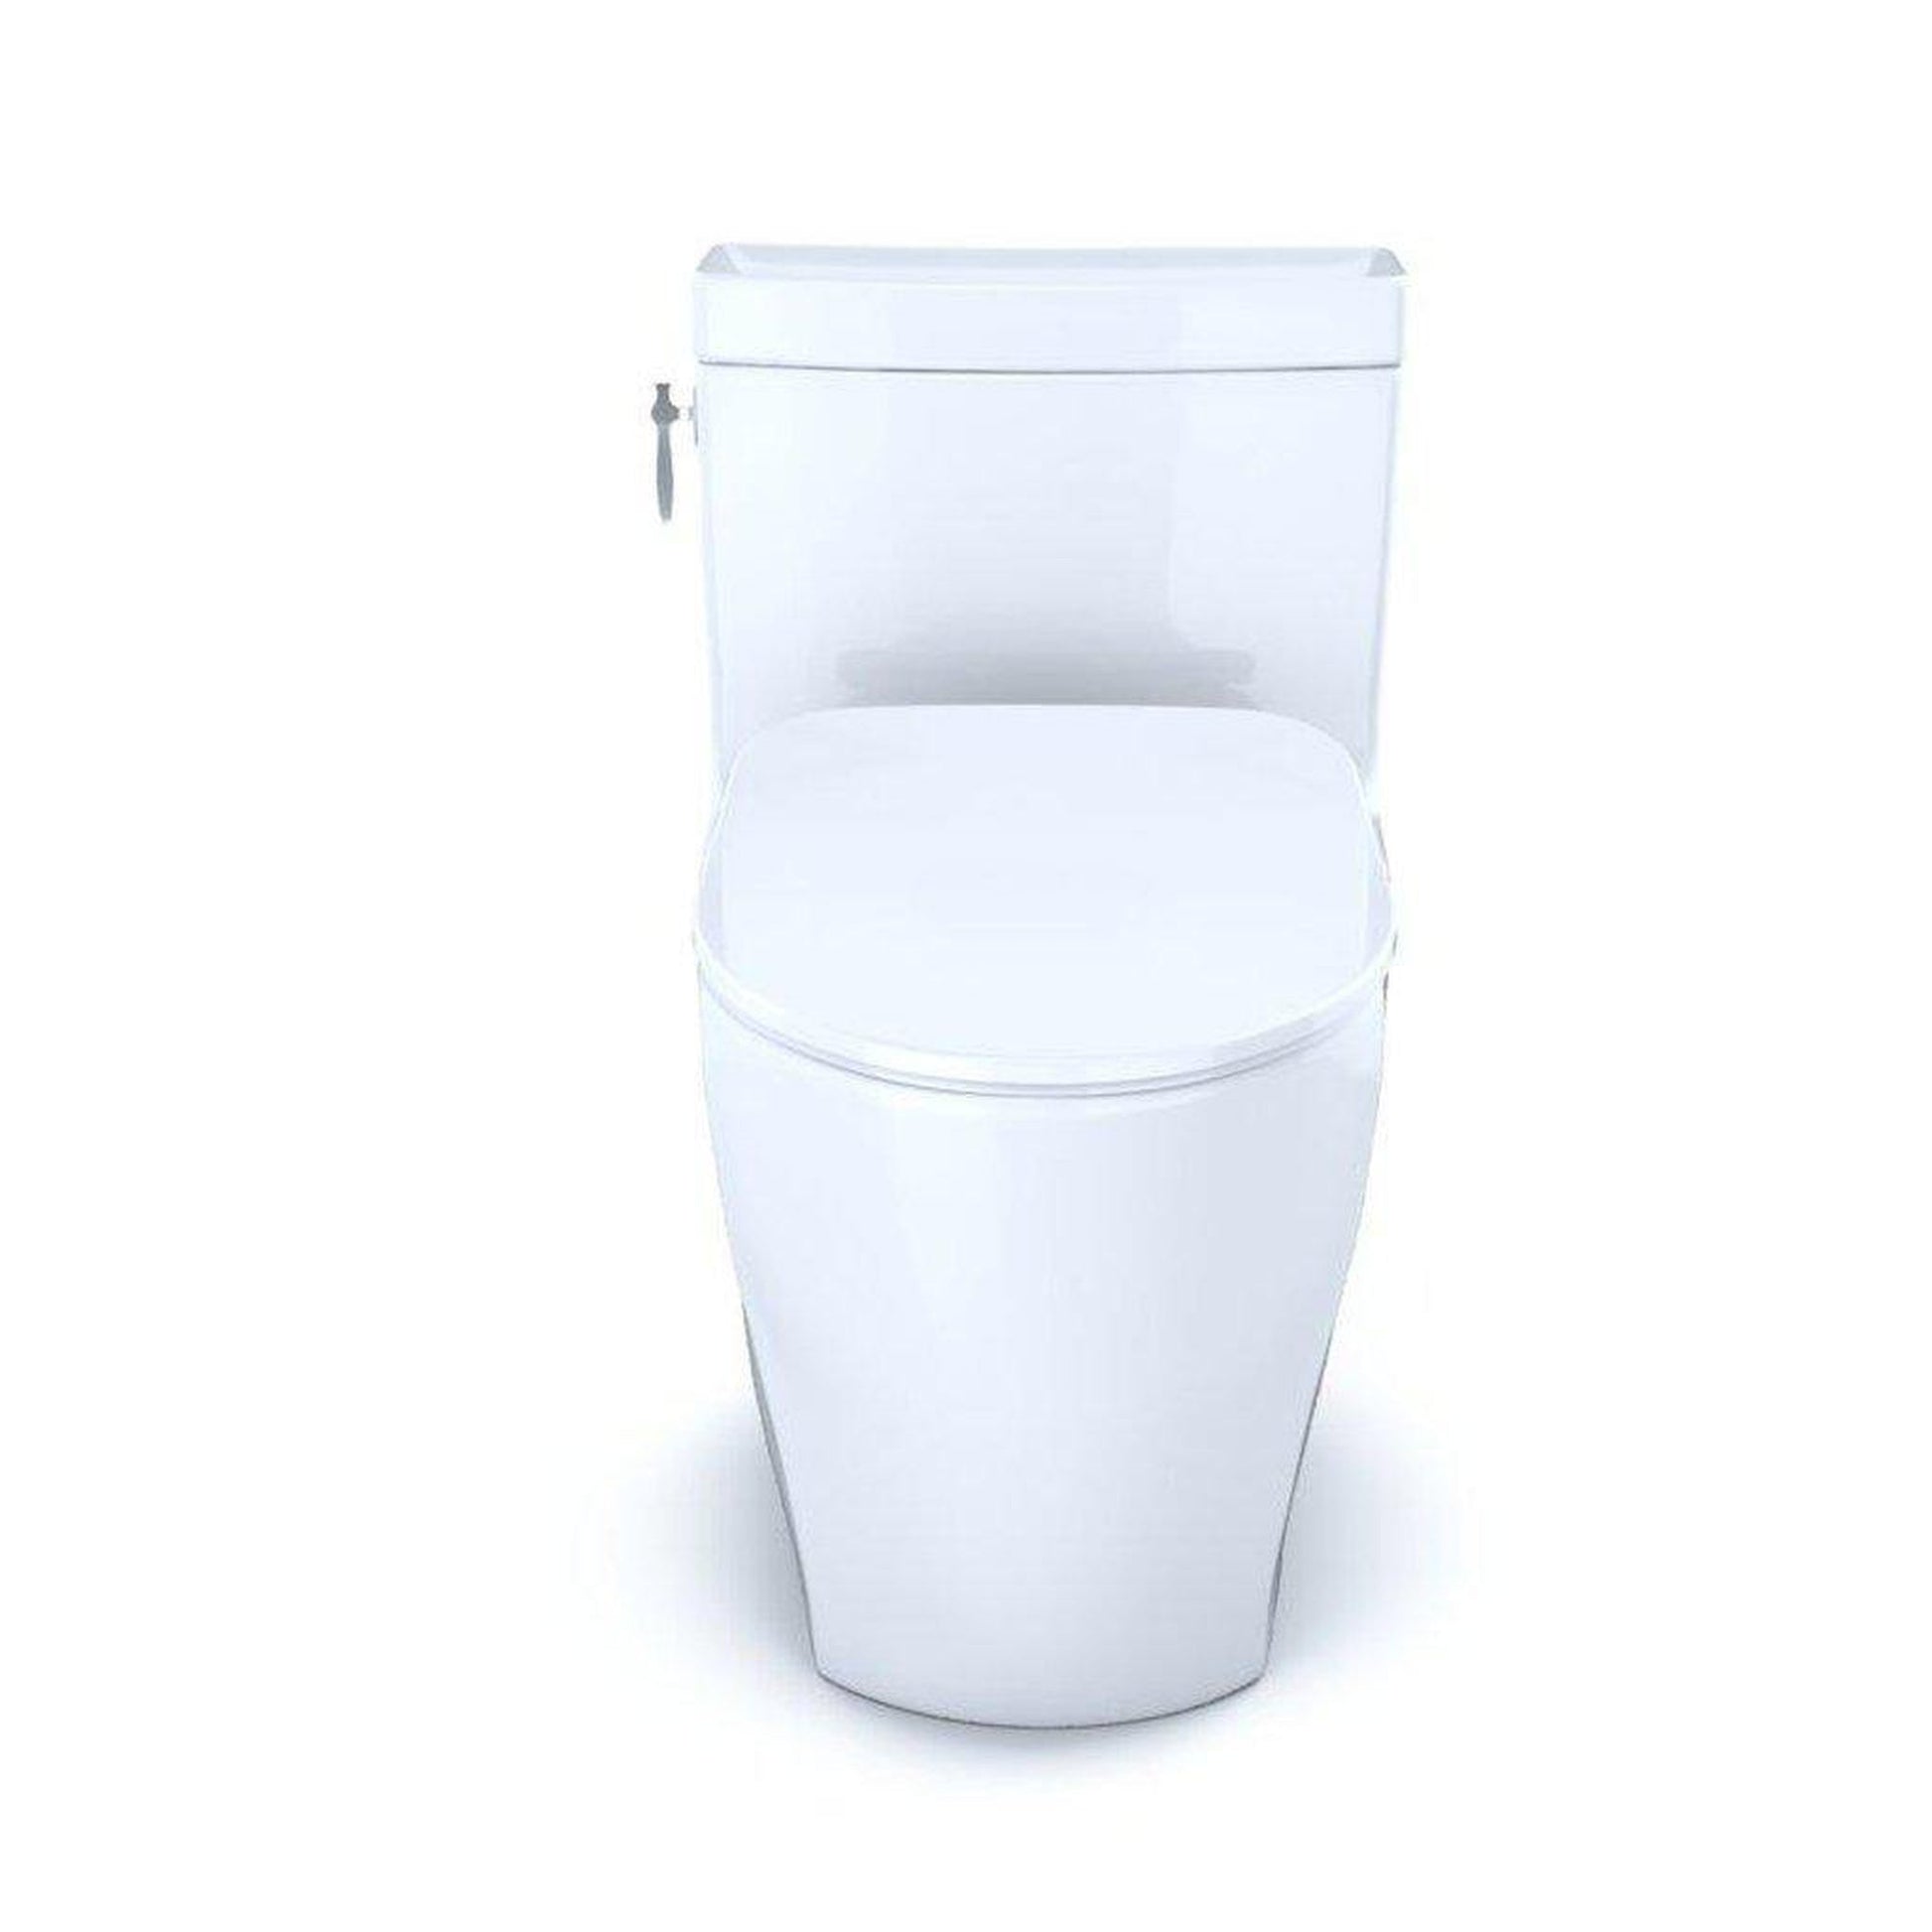 TOTO Aimes Cotton White 1.28 GPF Elongated One-Piece Toilet With Slim Seat & Washlet+ Connection